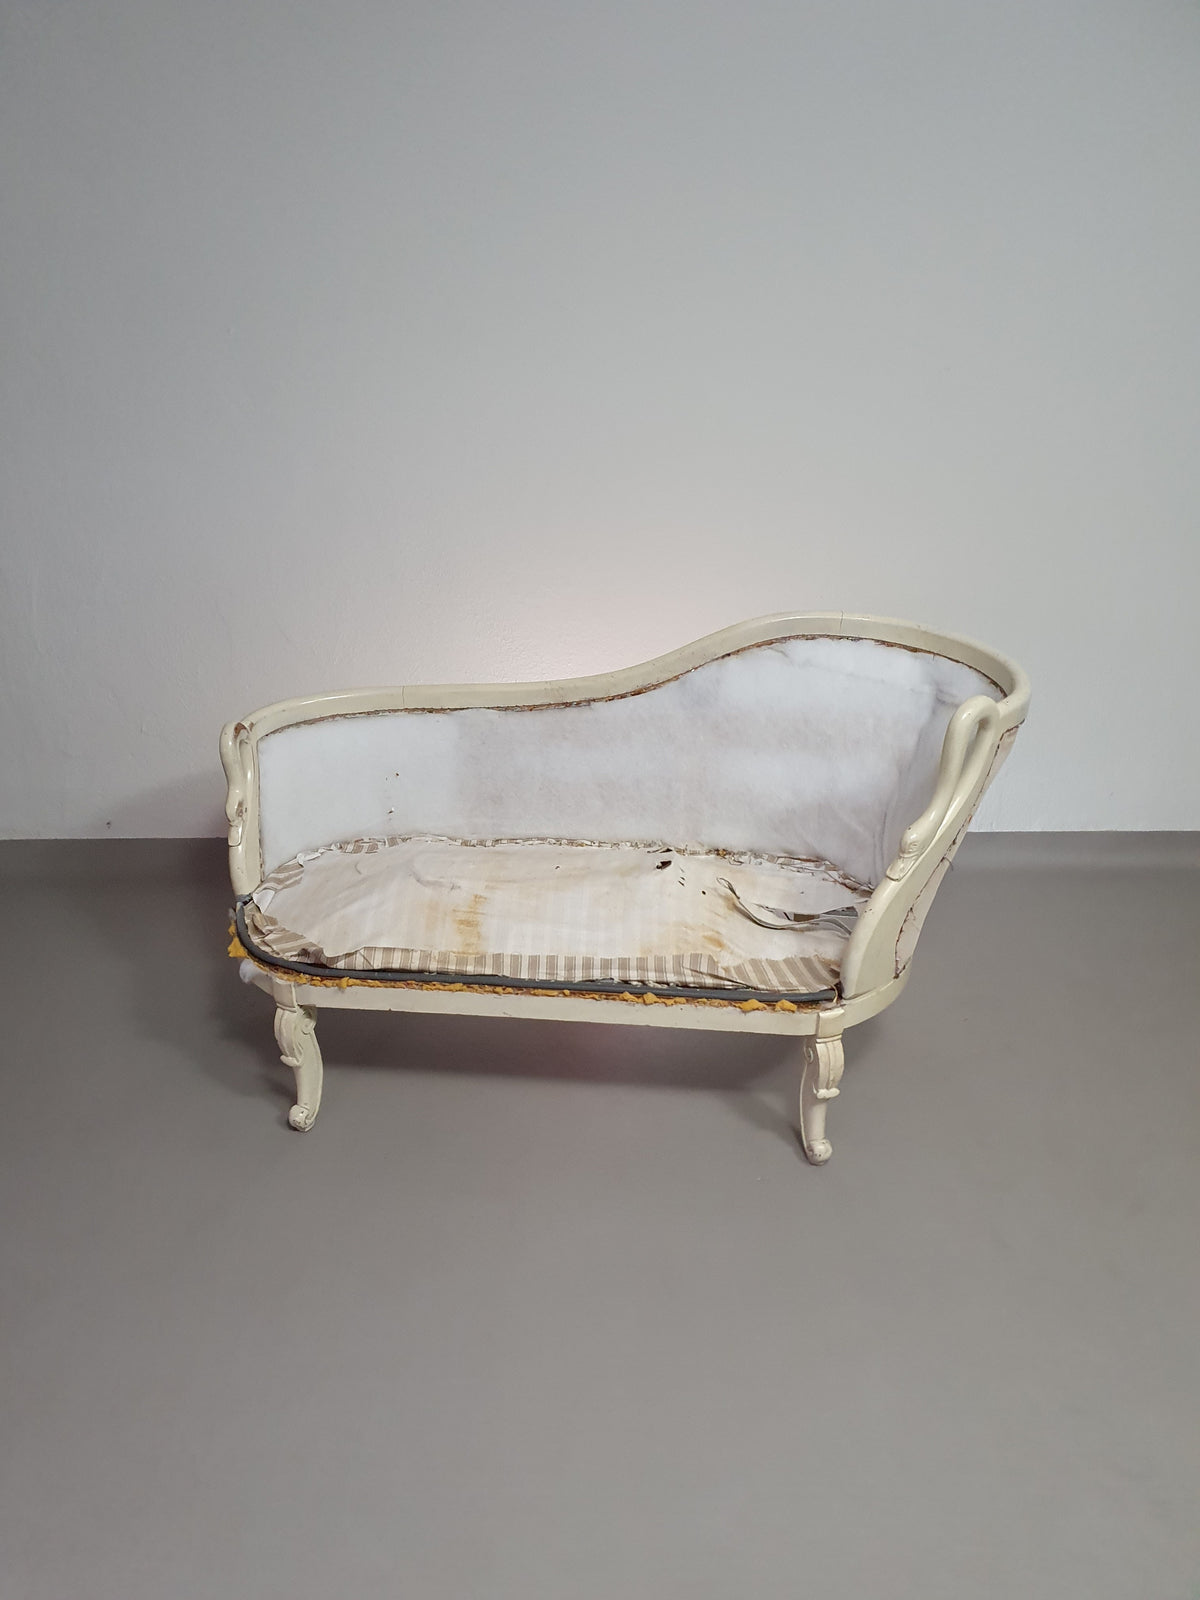 Beautiful old Art Noveau , unfinished Frenche canapé / chaise longue with gooseneck armrests